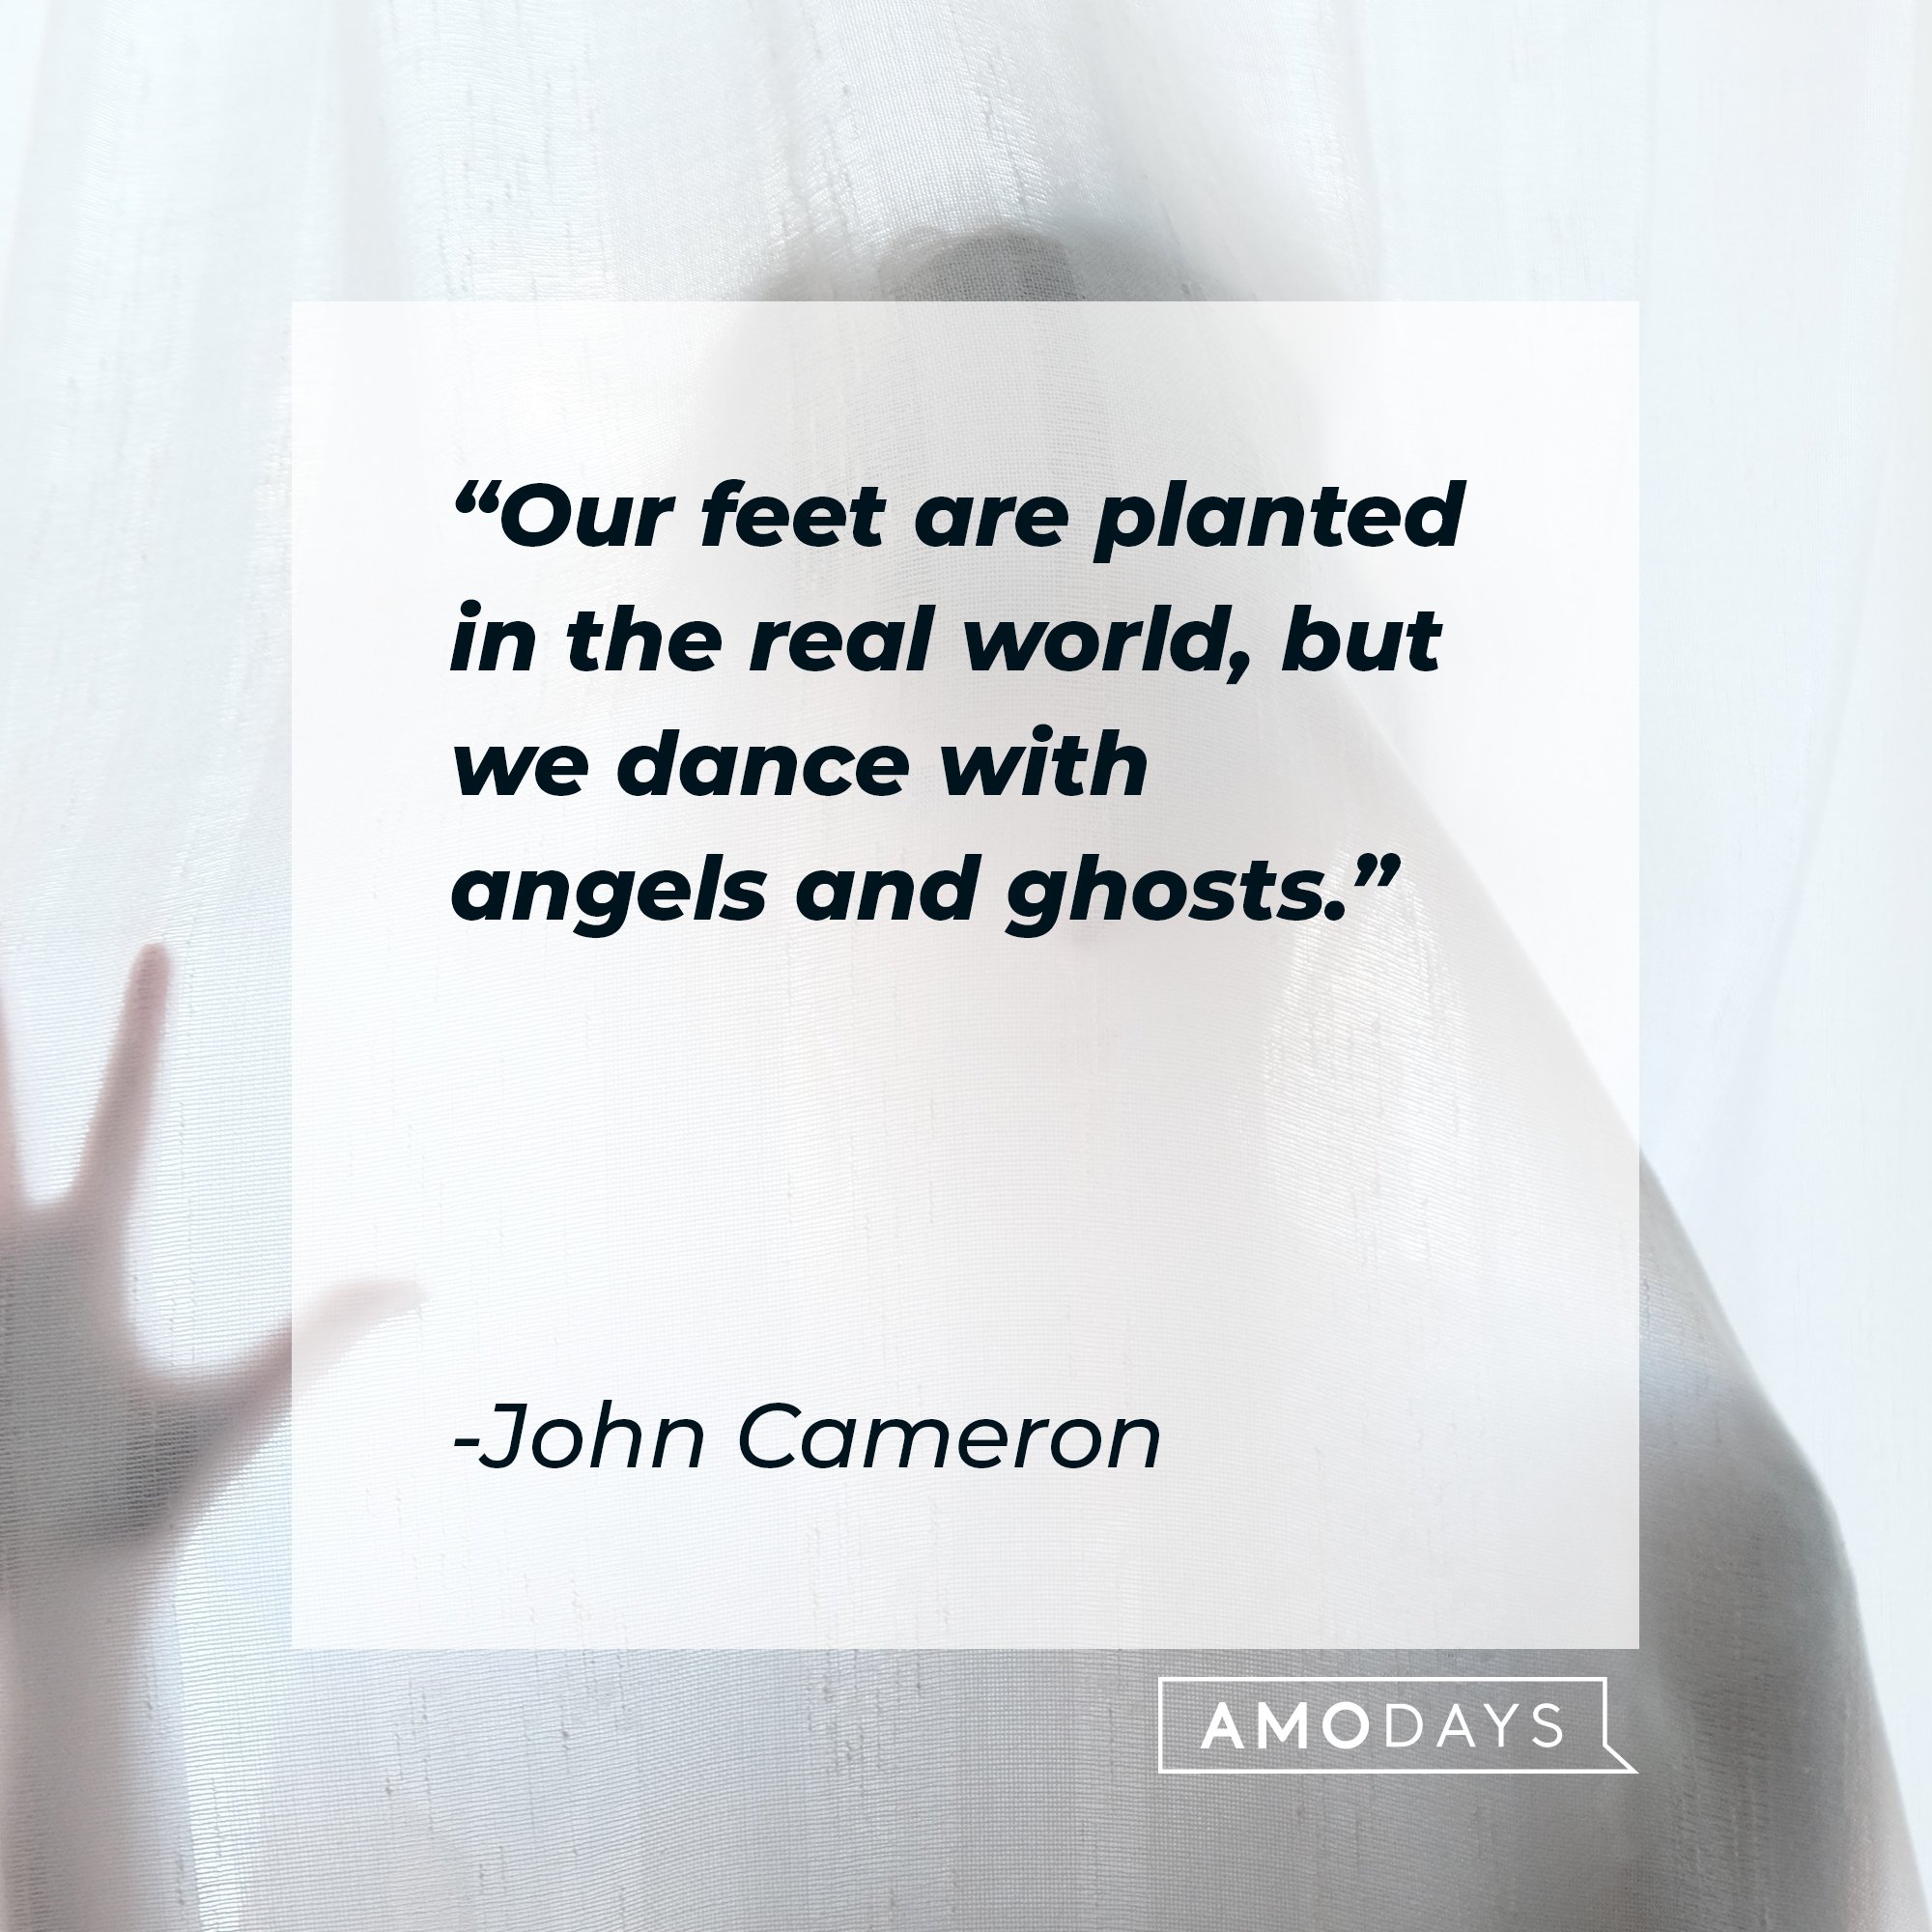 John Cameron Mitchell’s quote: "Our feet are planted in the real world, but we dance with angels and ghosts." | Image: AmoDays